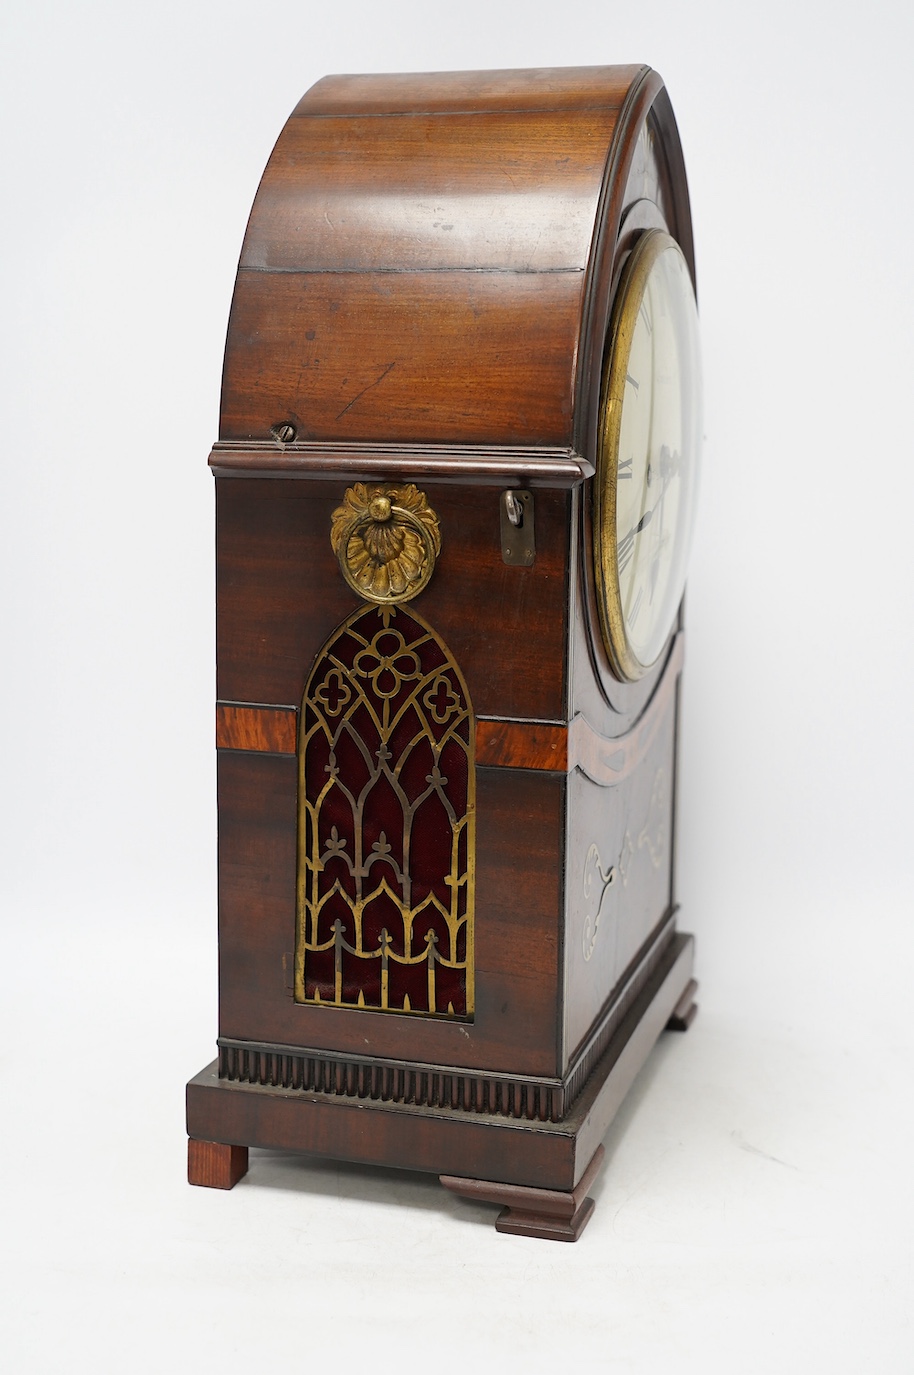 An early 19th century brass inlaid mahogany lancet shaped mantel clock by G. Willson of London, with pendulum and door-key, no winding key, 45cm. Condition - fair to good, not tested as working